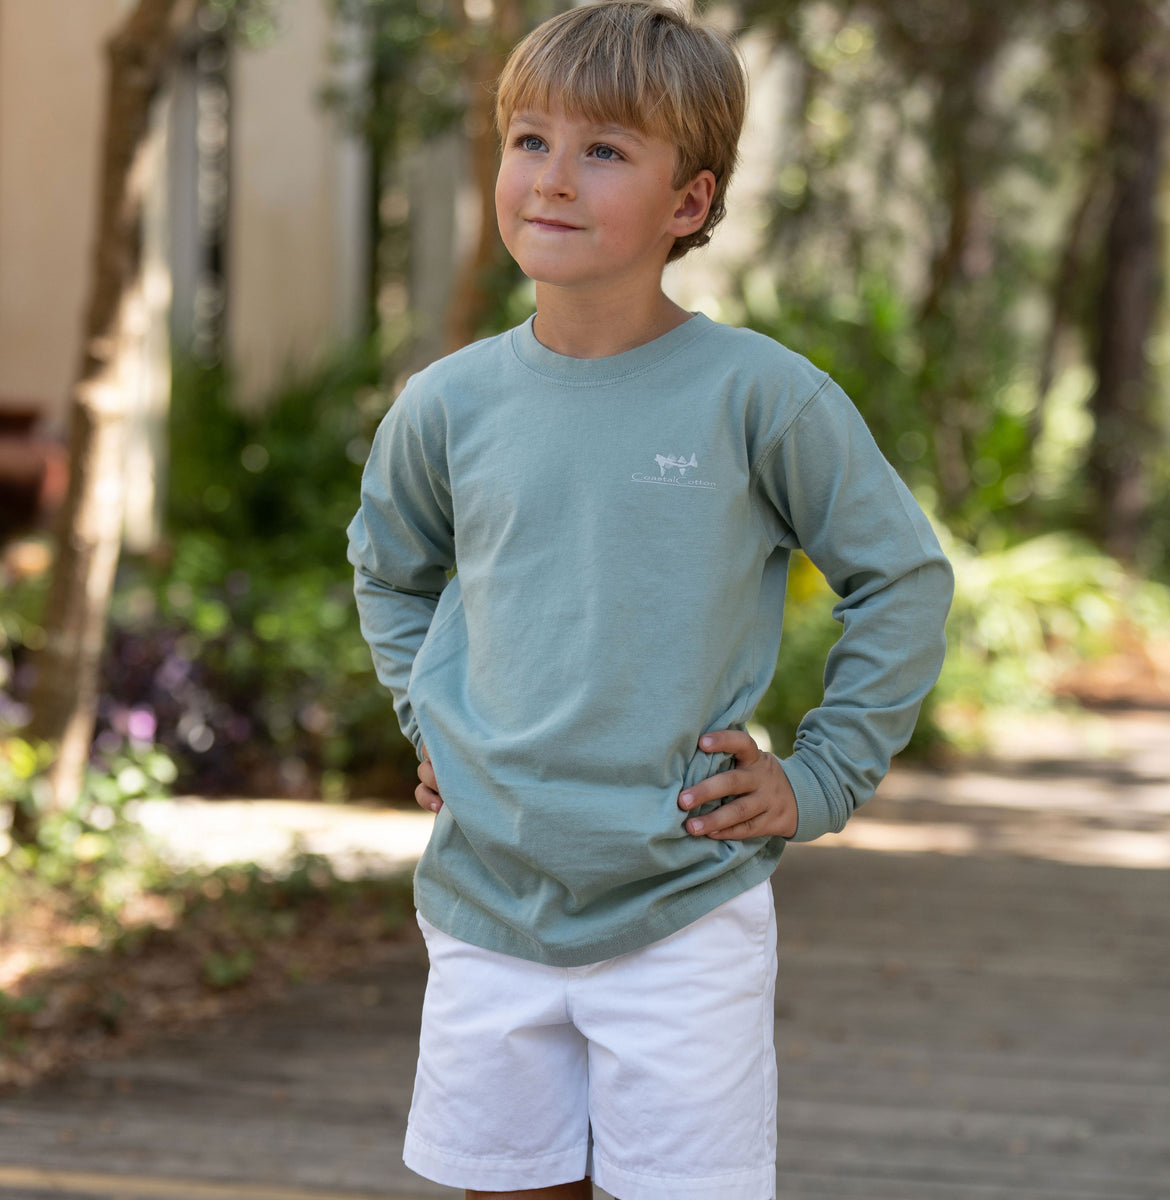 Youth Collection – Tagged youth_large – Coastal Cotton Clothing